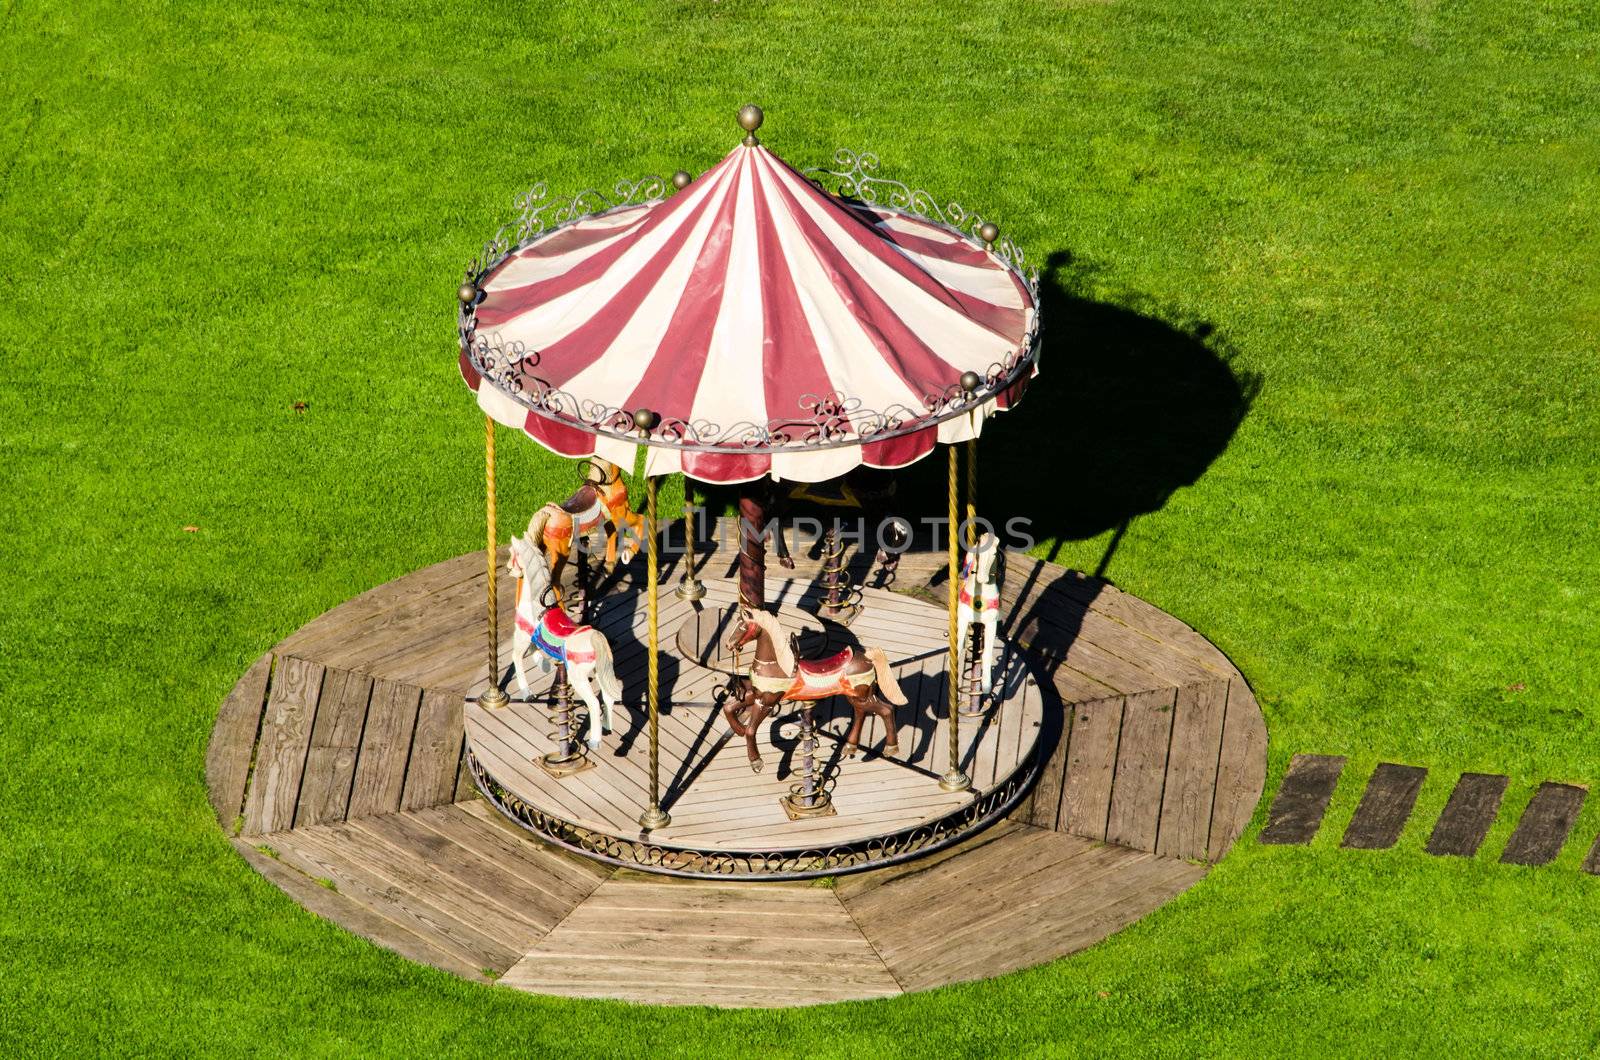 the small carousel in green grass